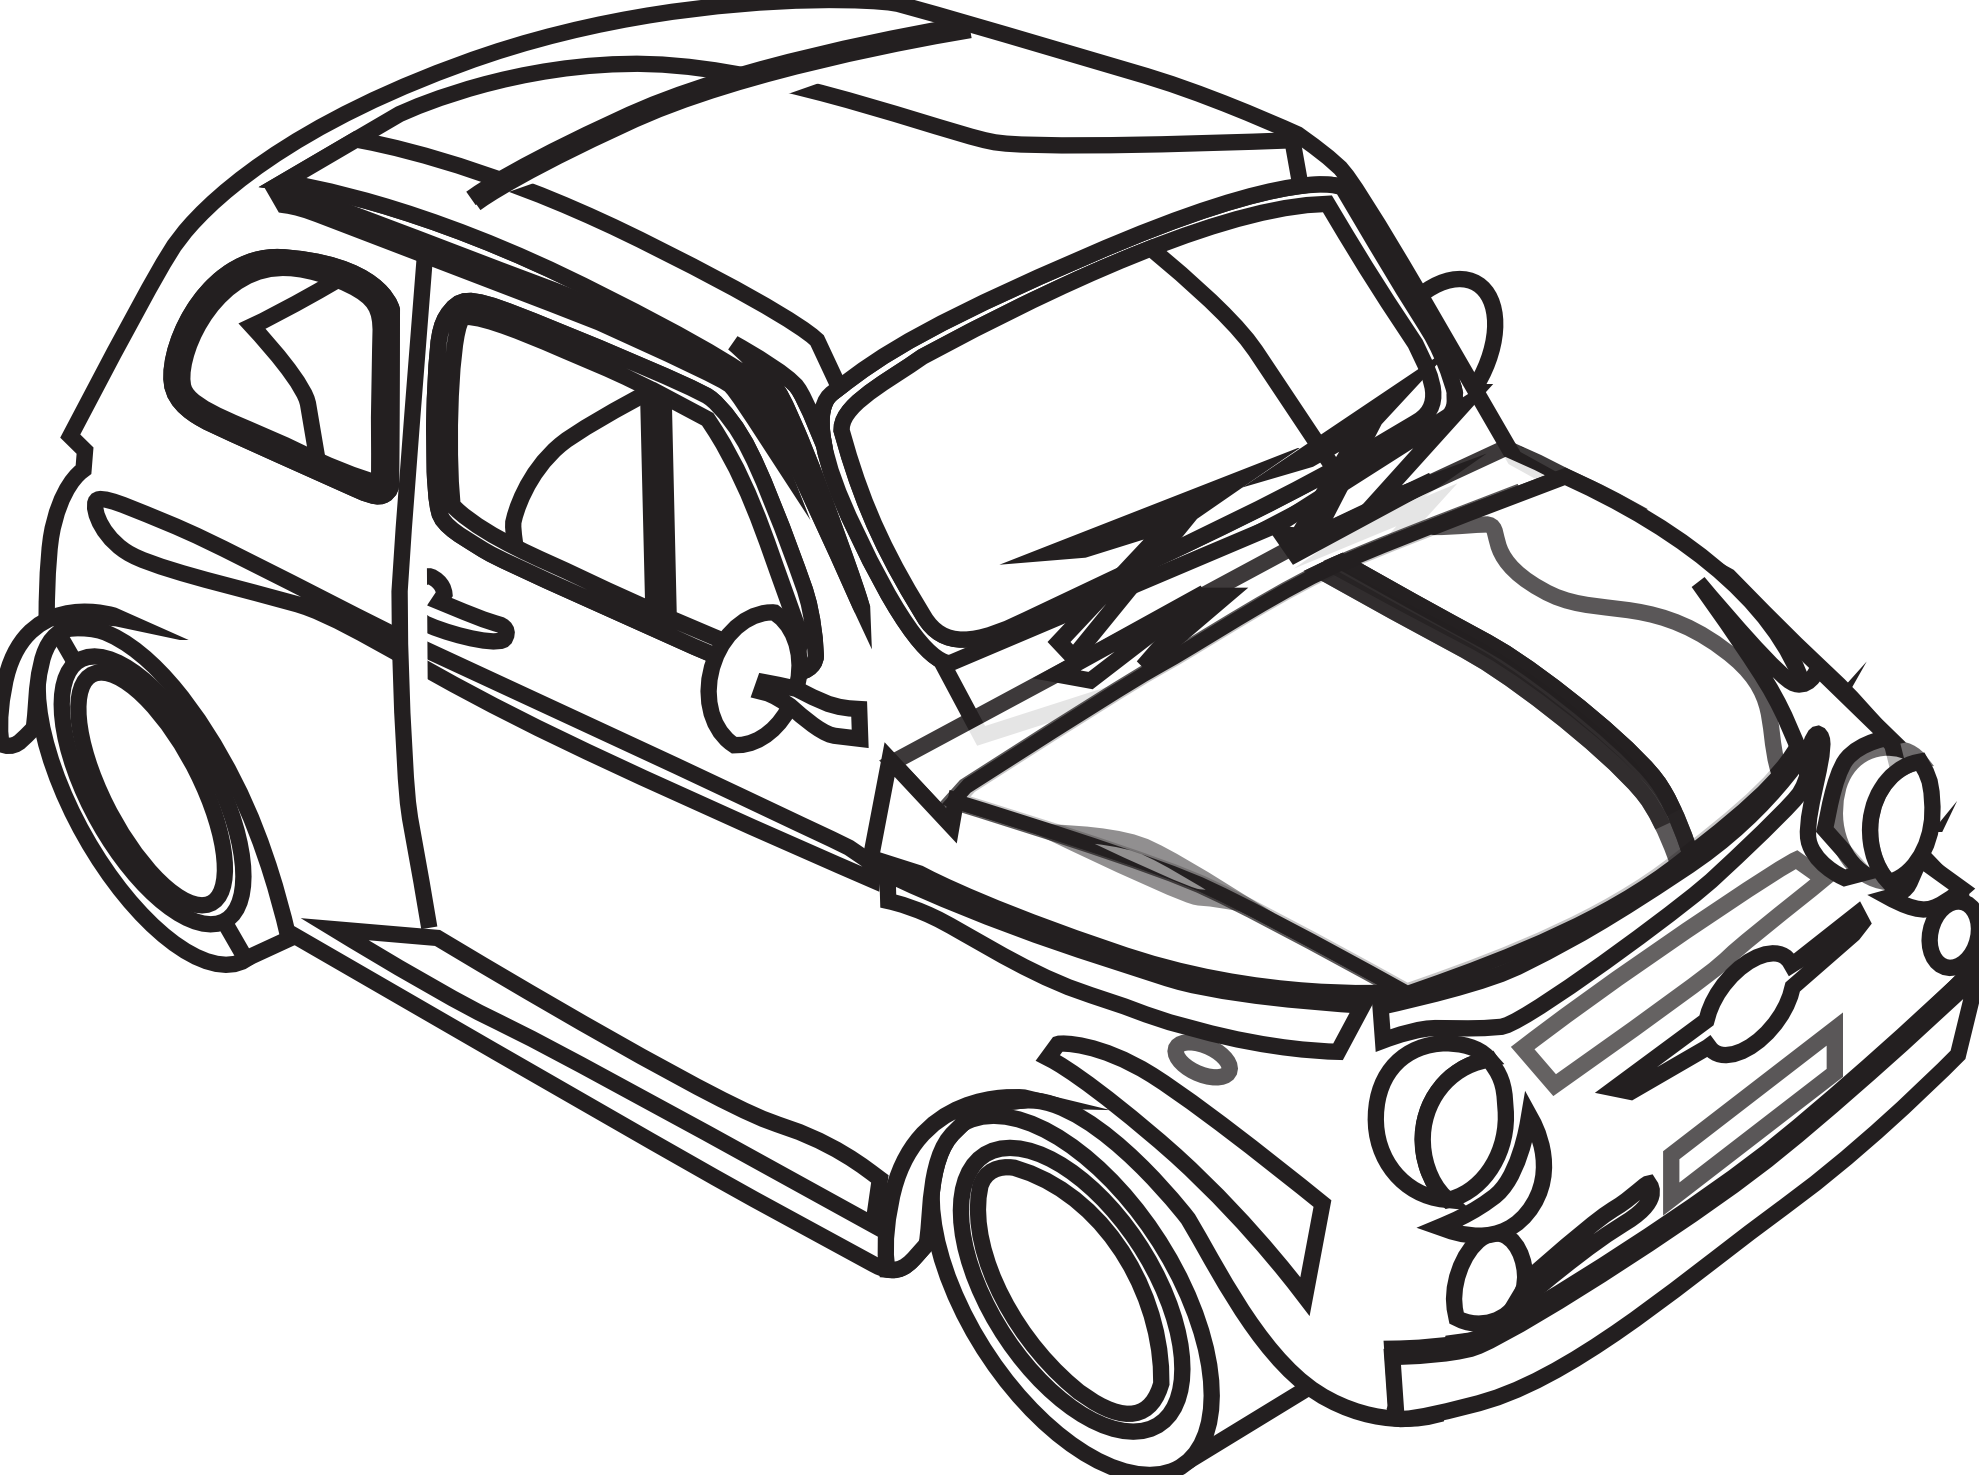 Black And White Car Drawings | Free Download Clip Art | Free Clip ...